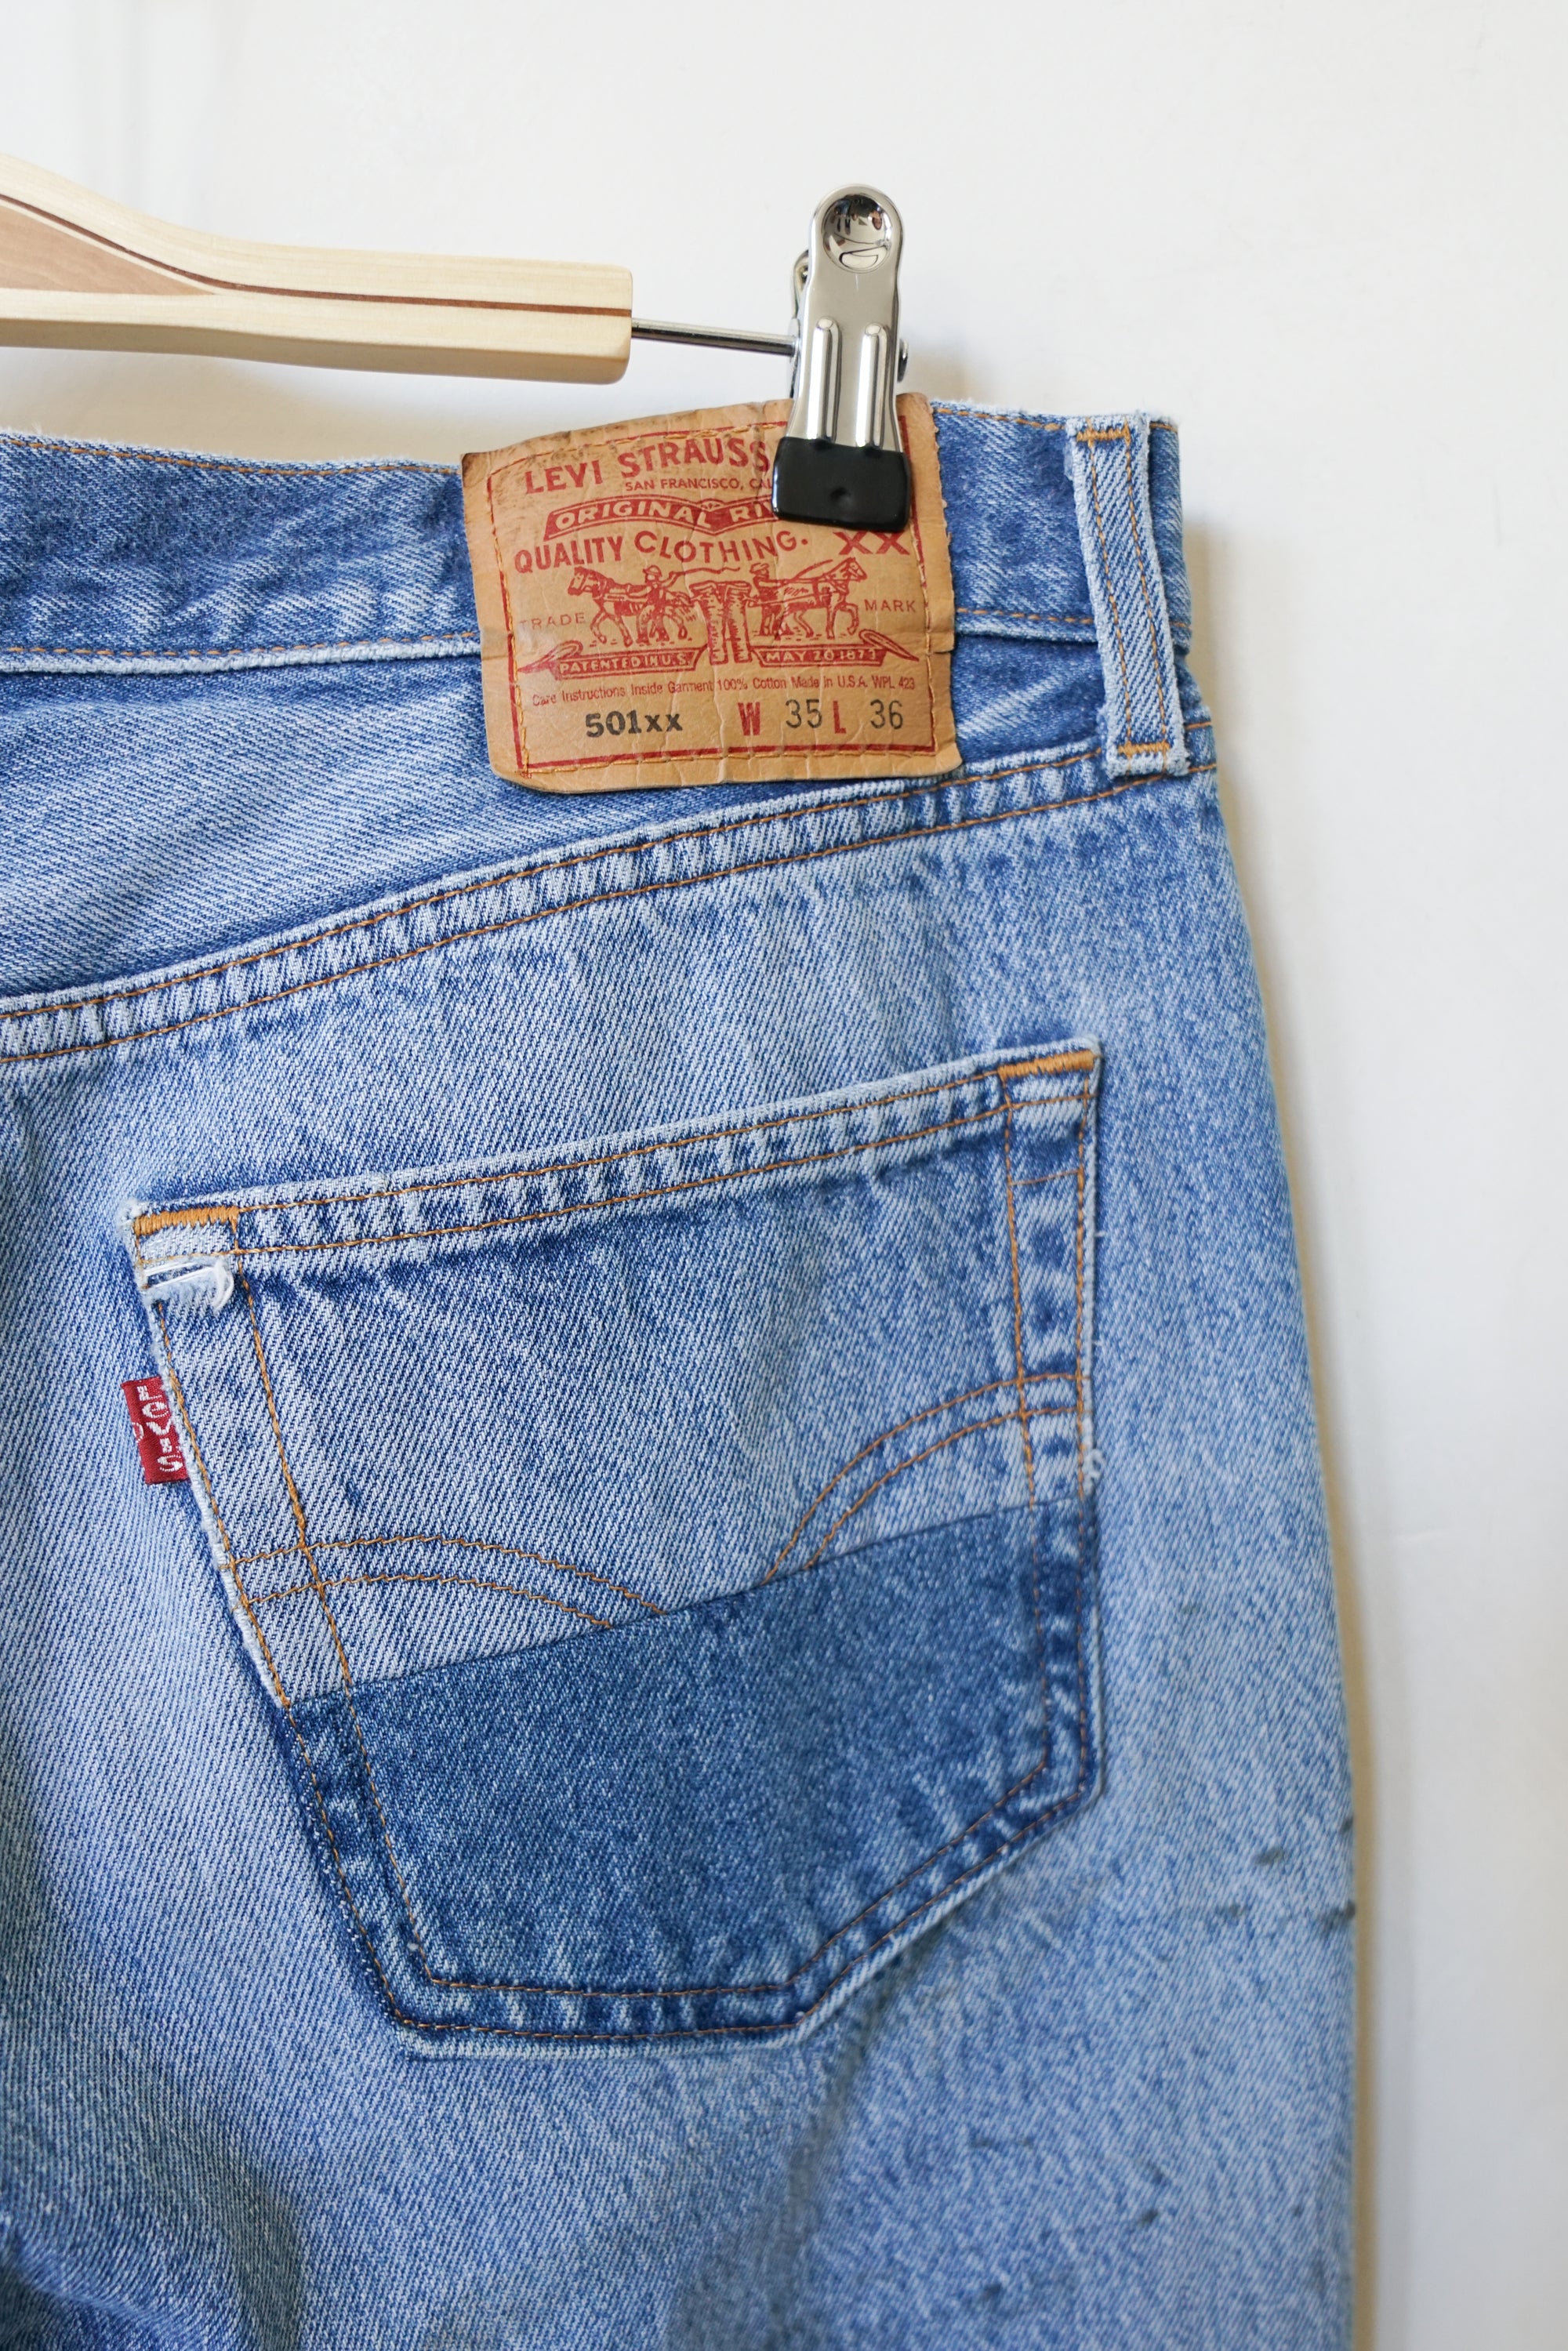 Repaired Vintage Levis 501 33W